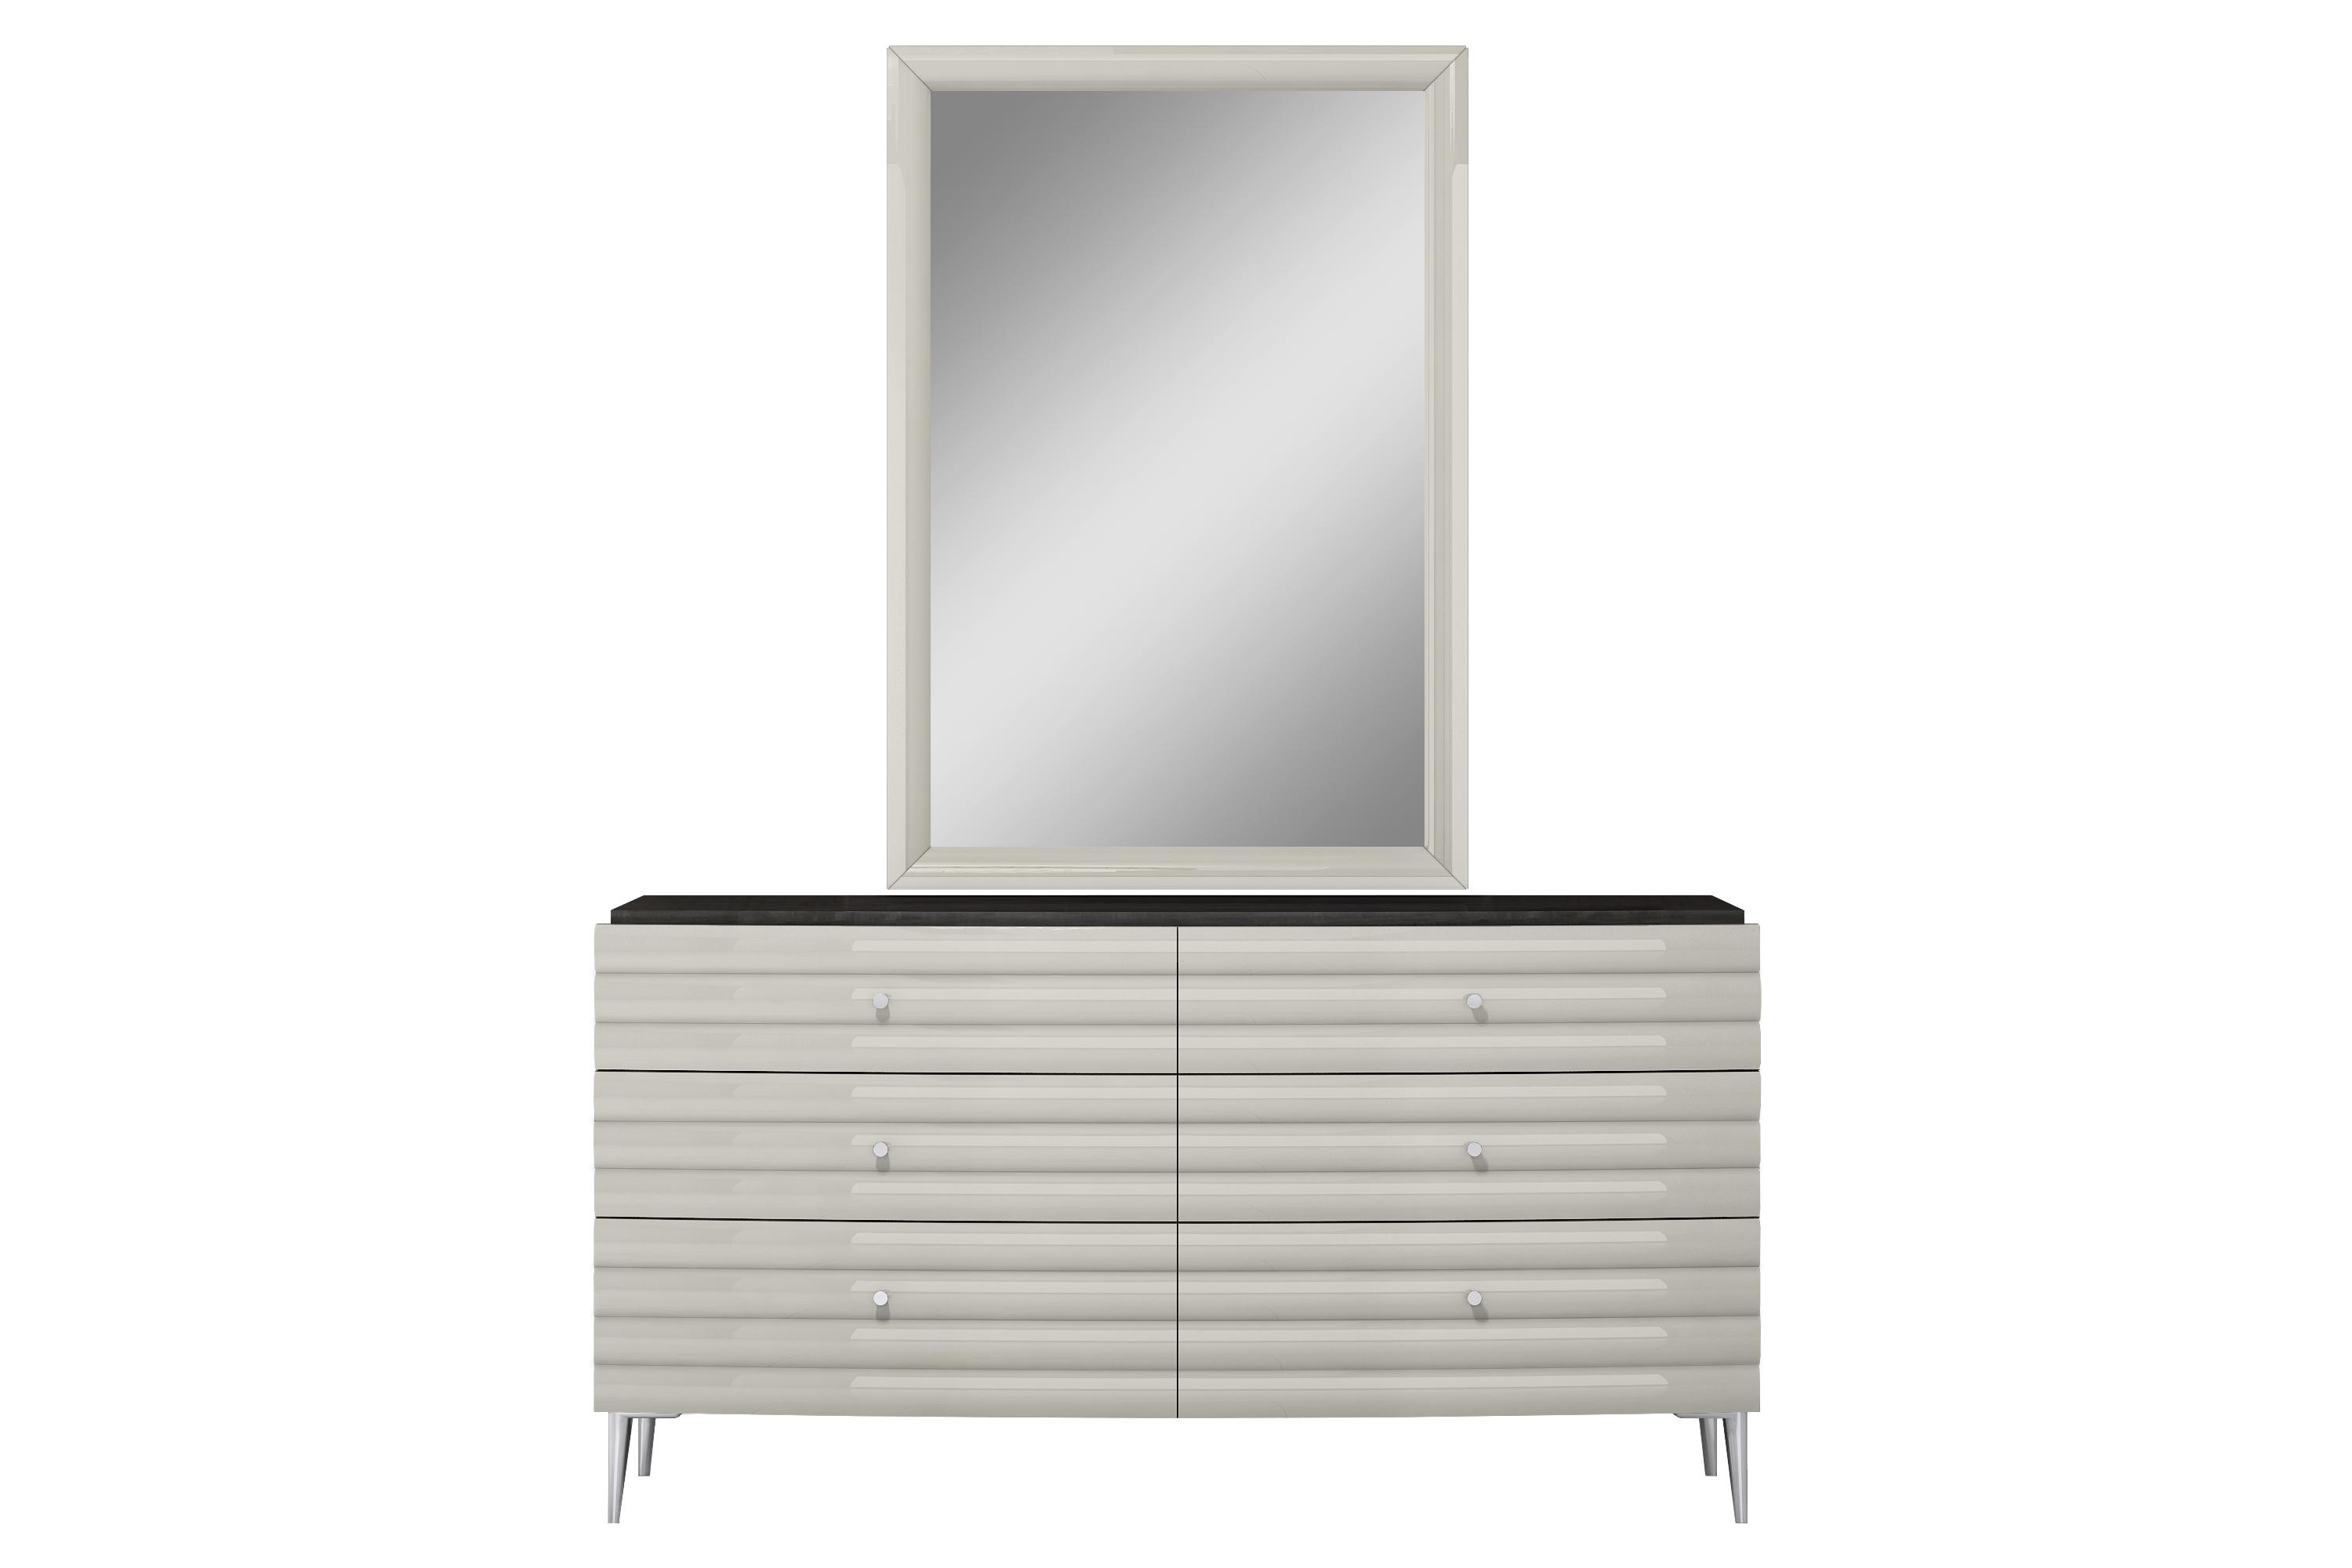 Contemporary Dresser w/Mirror DR1752-DGRY/LGRY-2PC Pino DR1752-DGRY/LGRY-2PC in Dark Gray 